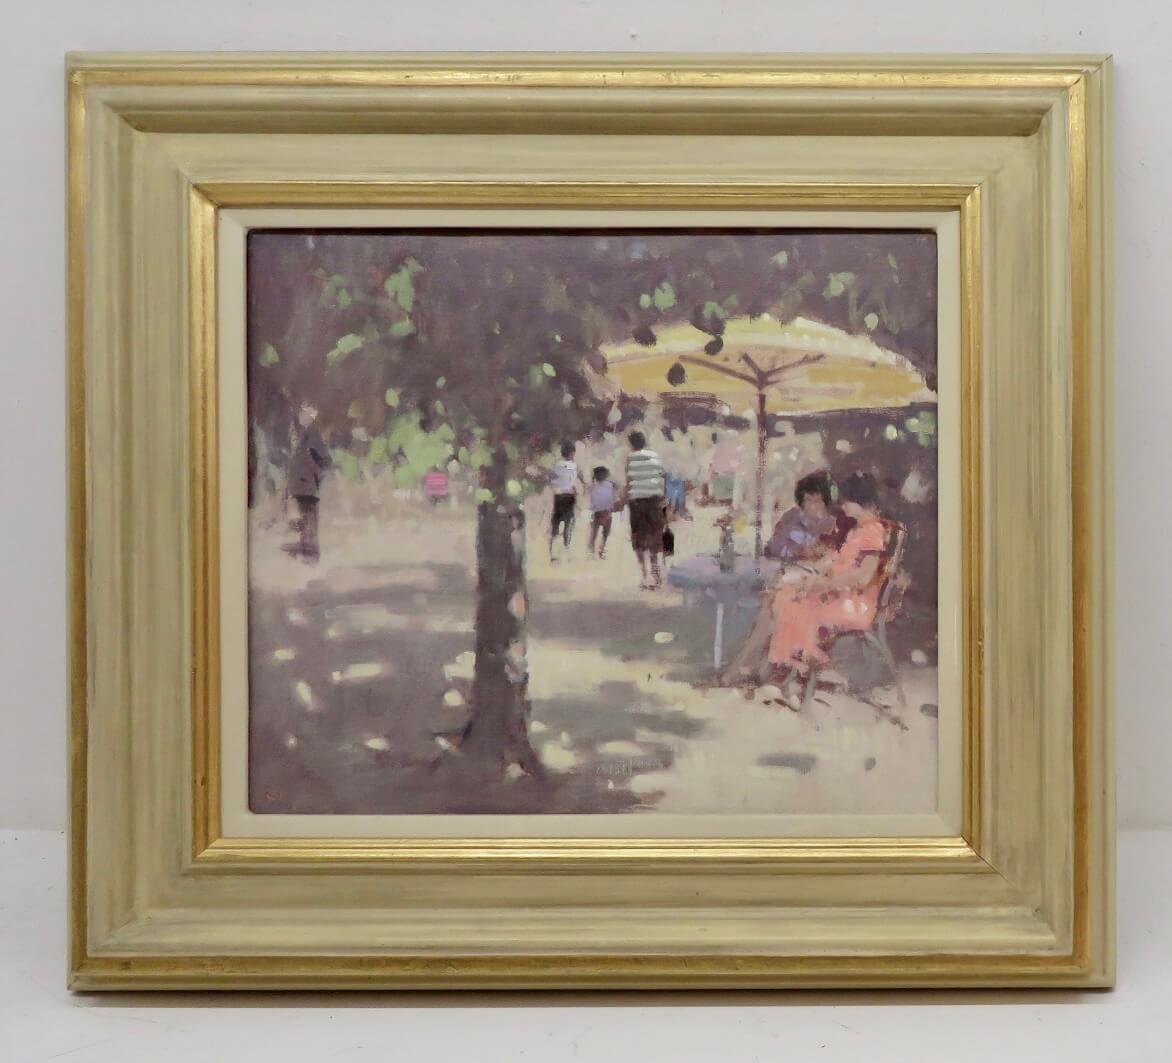 ARTIST: Stephen Brown RBA (1947-) British 

TITLE: "In The Shade Orbatello Italy"

SIGNED:  initialled lower left and labelled verso

MEDIUM: oil on board

SIZE:  52cm x 47cm inc frame 

CONDITION: very good

DETAIL:Stephen Brown was born in Chard,